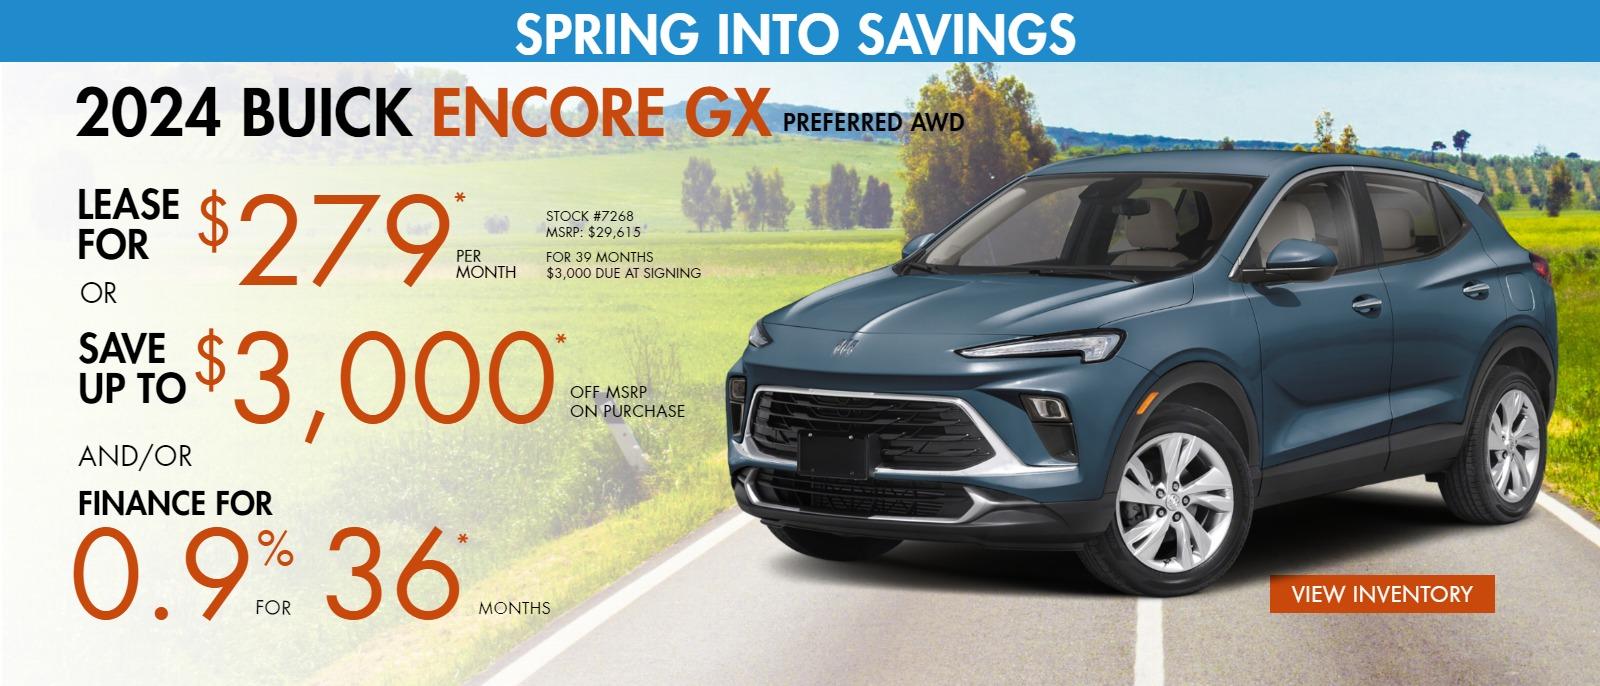 2024 Buick Encore GX Preferred AWD
MSRP $29,615
Stock #7268
Lease $279* for 39 months

*Disclosure popup

*$465 Dealer Discount from MSRP
*$2,250 Buick GMC Lease Loyalty
*$1,000 Buick Targeted Market Private Offer
*$500 1st Responder or Military
*$3,000 due at signing, 10k miles per year
Or

Save up to $3,250* off MSRP and/or Finance 0.90% up 36mos
*Disclosure Popup
*$2,000 Buick Targeted Market Private offer
*$750 Conquest
*$500 1st Responder or Military